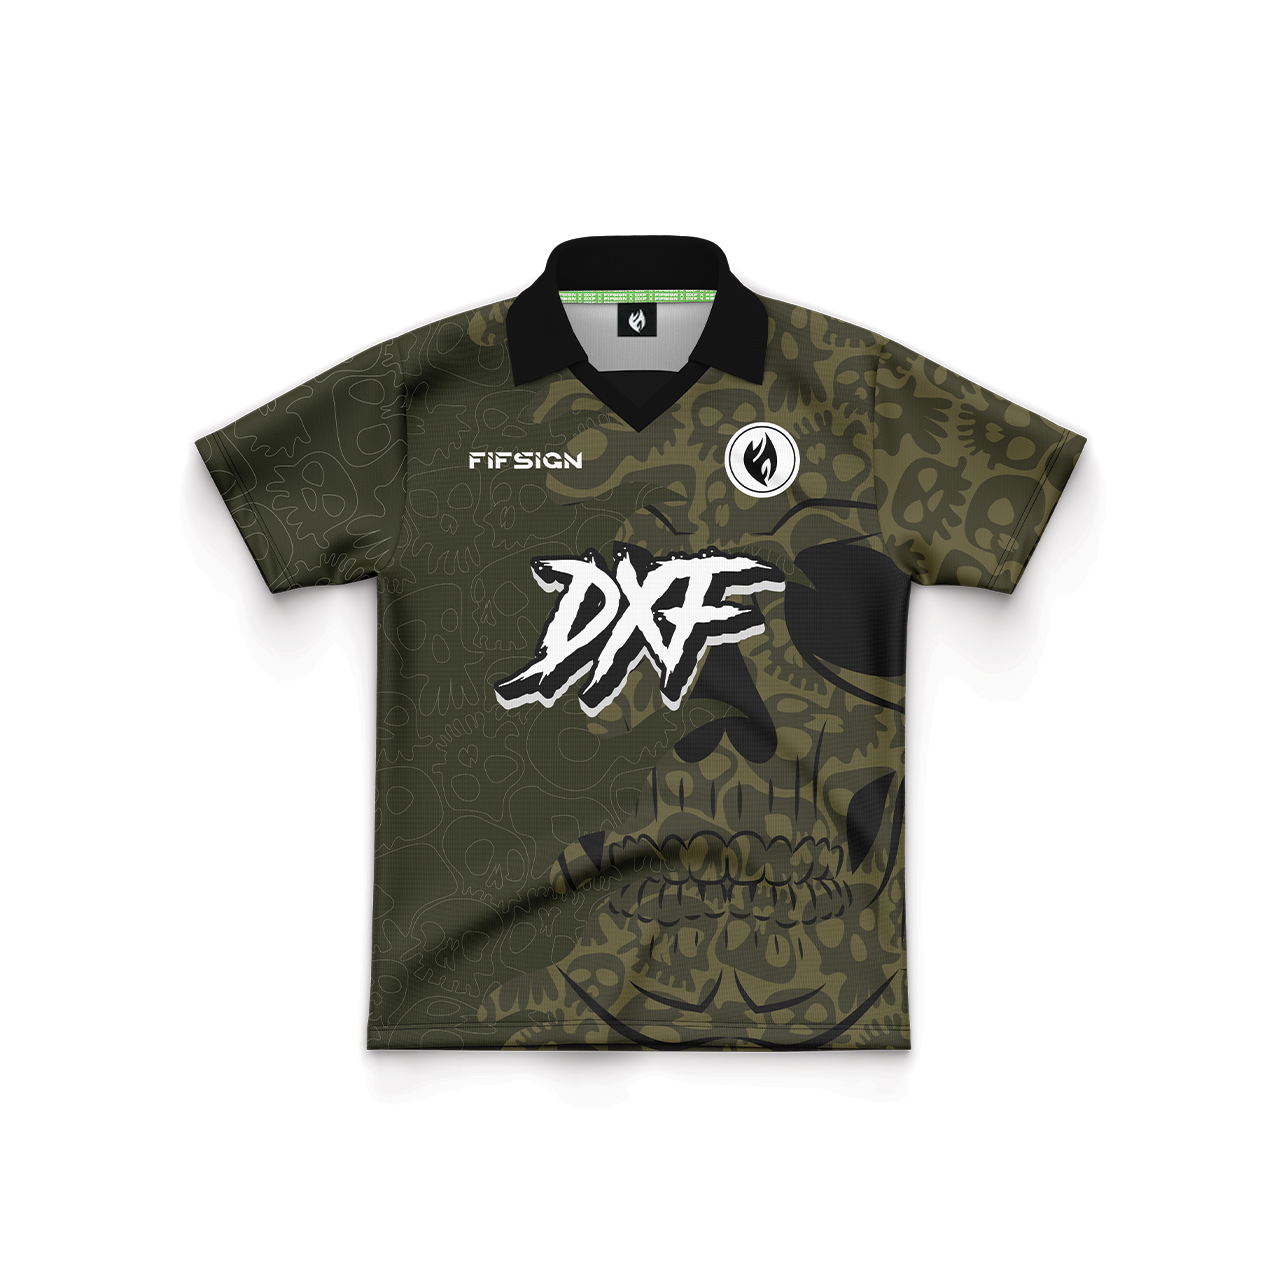 FIFSIGN X DXF collaboration Jersey